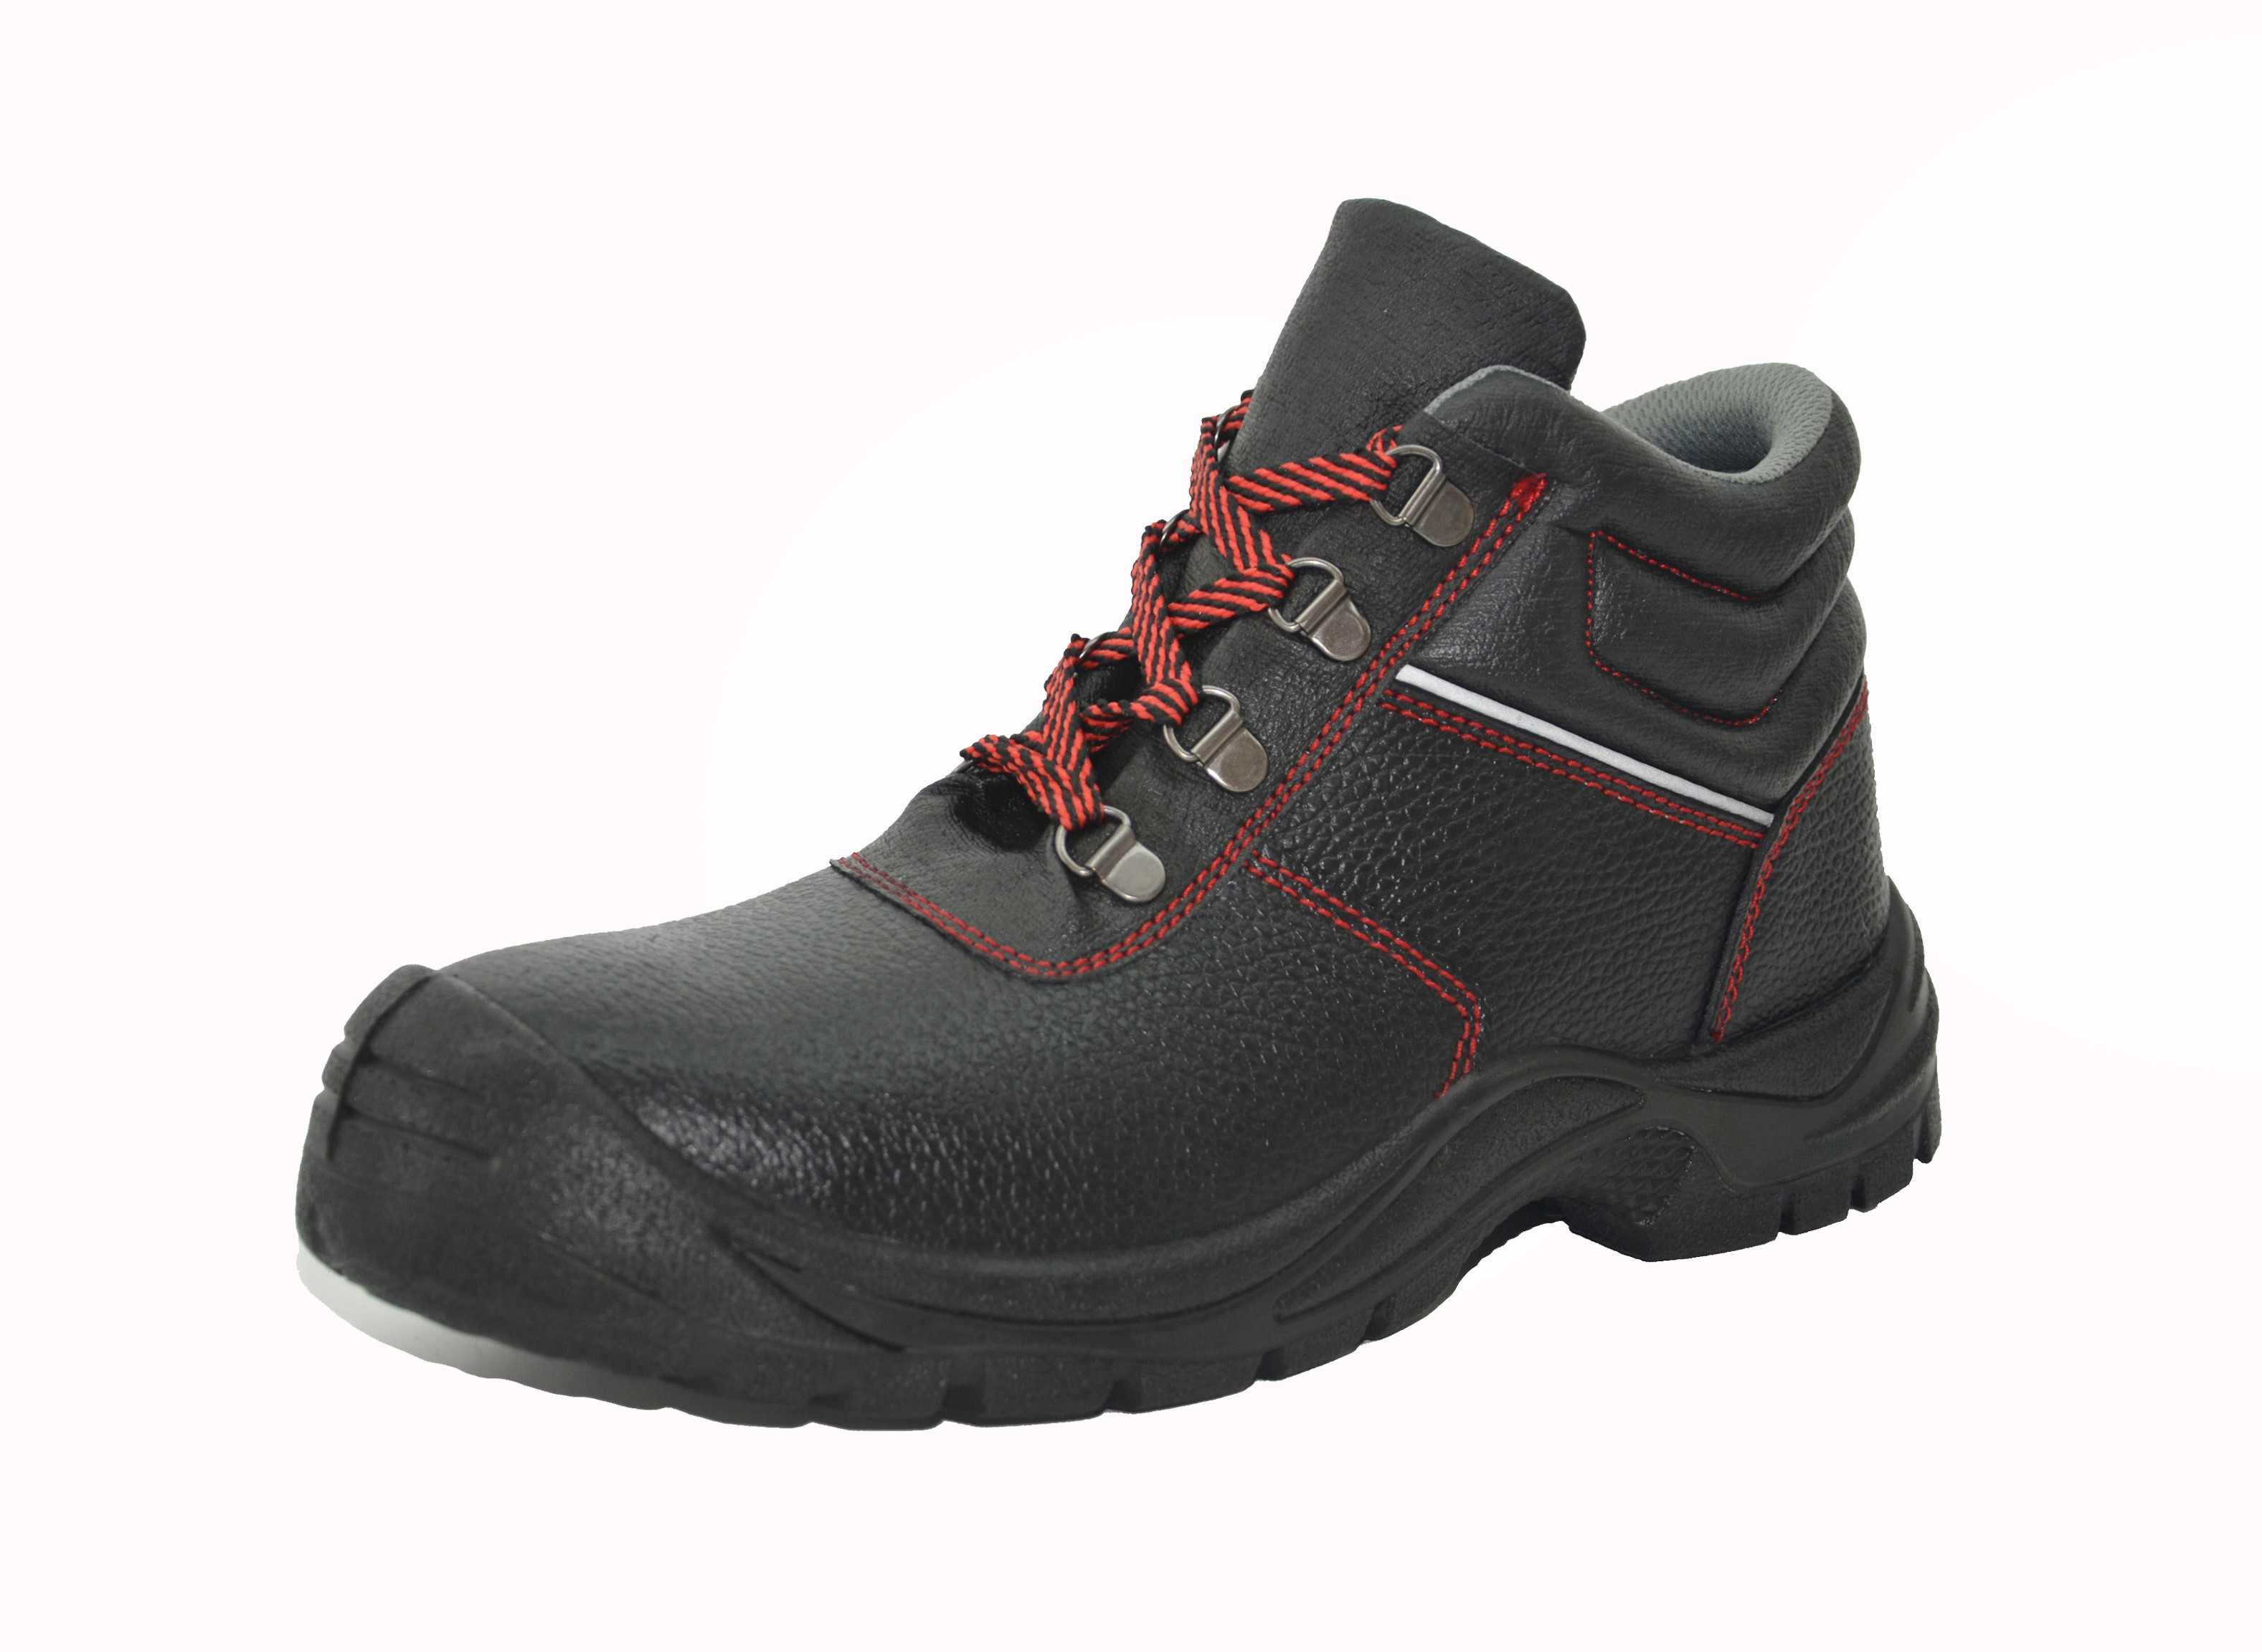  Impact - Proof Genuine Leather Work Shoes PU Outsole Acid And Alkali Resistance Manufactures